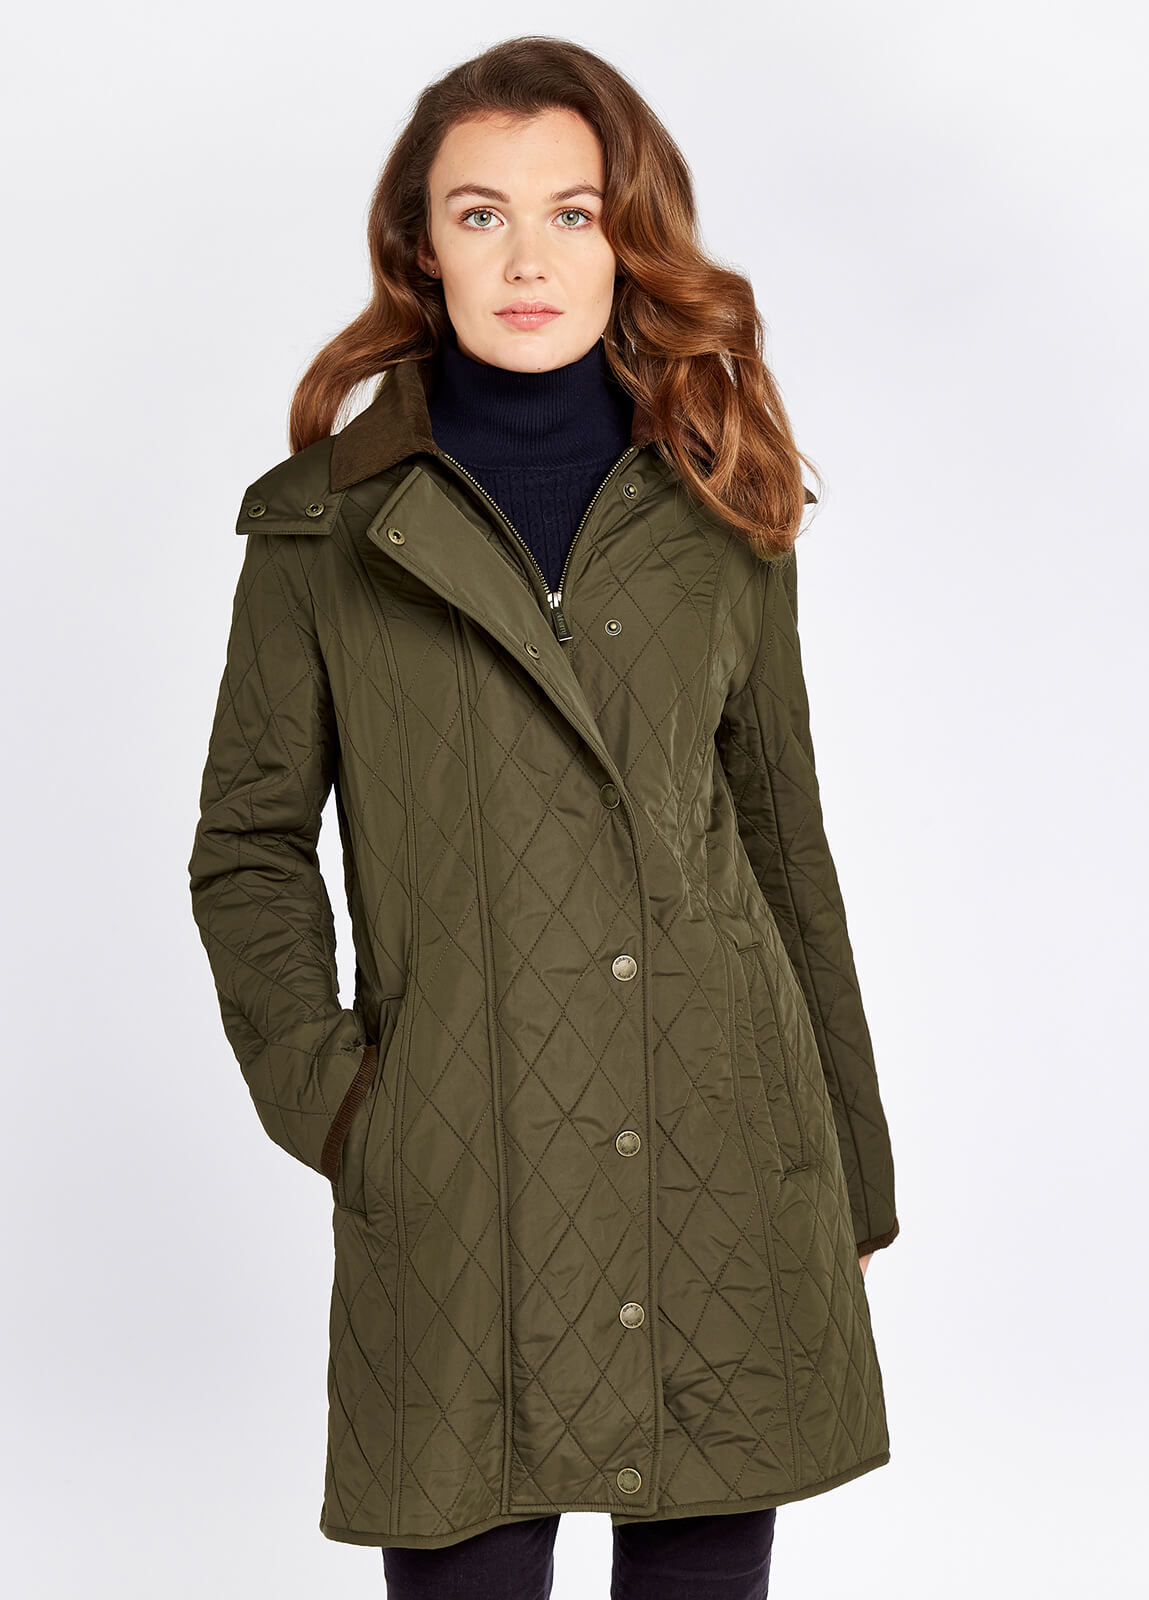 Jamestown Quilted Jacket - Olive